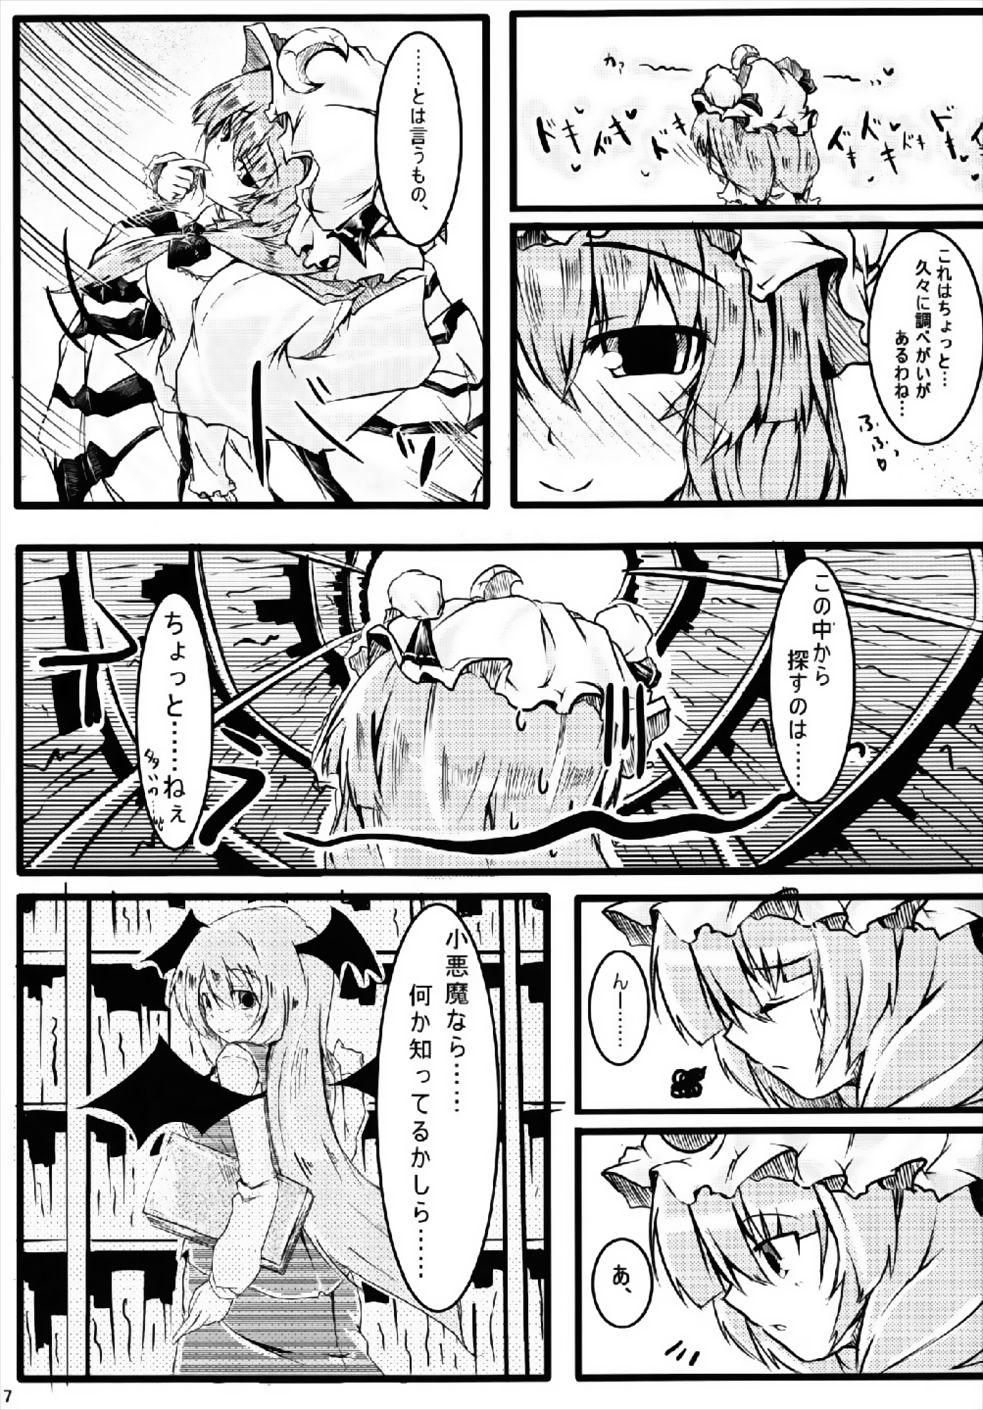 Ass Fetish RemiFlaPatche! - Touhou project Big Booty - Page 6